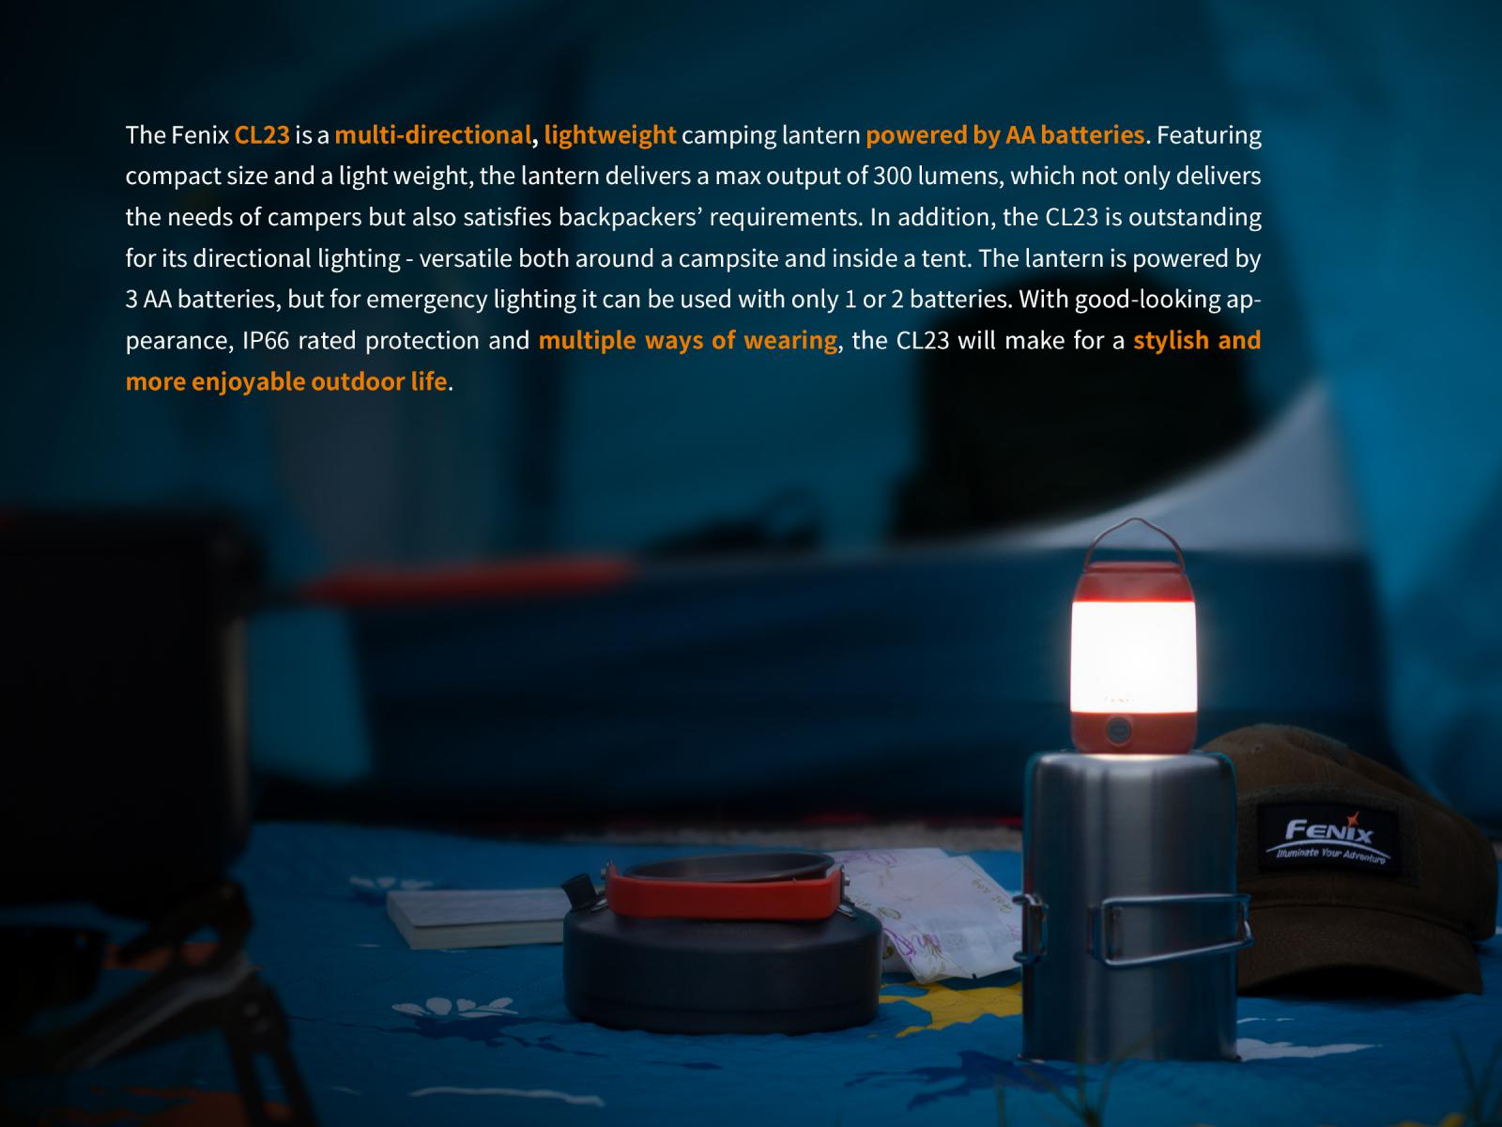 Fenix CL23 LED Camping Lantern in India, Camping Site Light for Adventures, Trails and Hiking, Emergency Light, Highly Portable Lightweight LED Light 